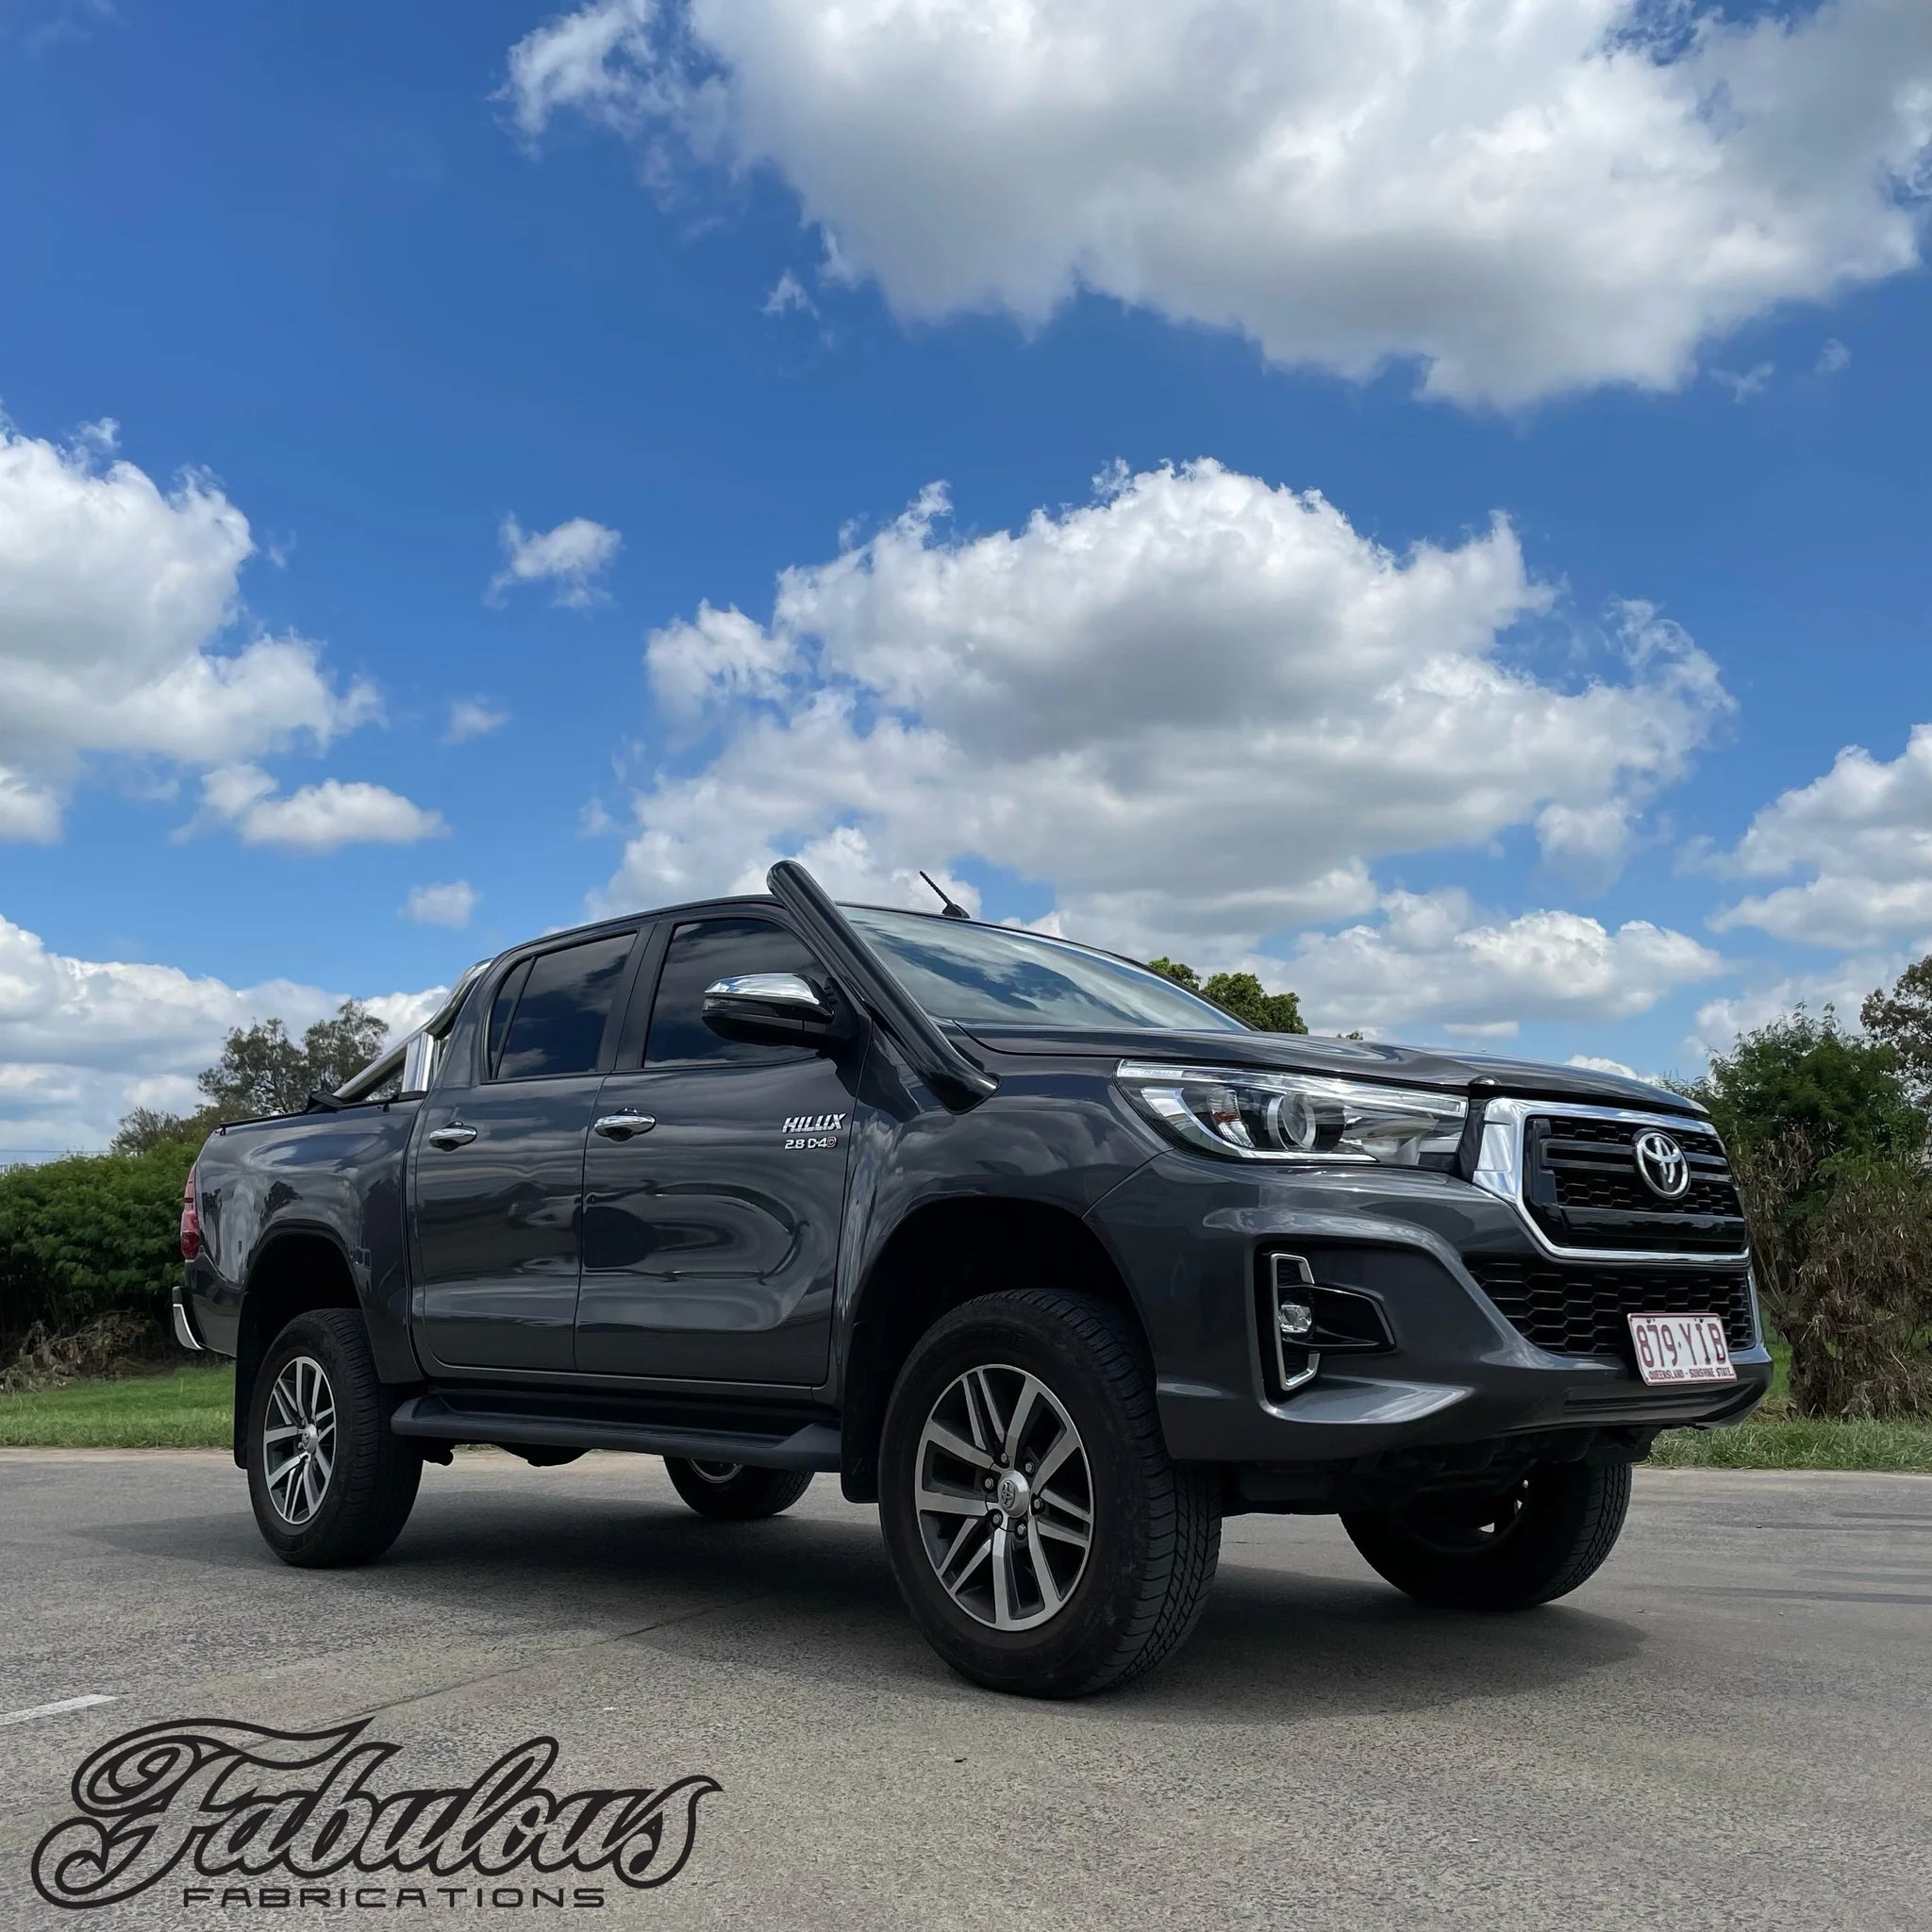 Toyota Hilux N80 Short Entry Stainless Snorkel